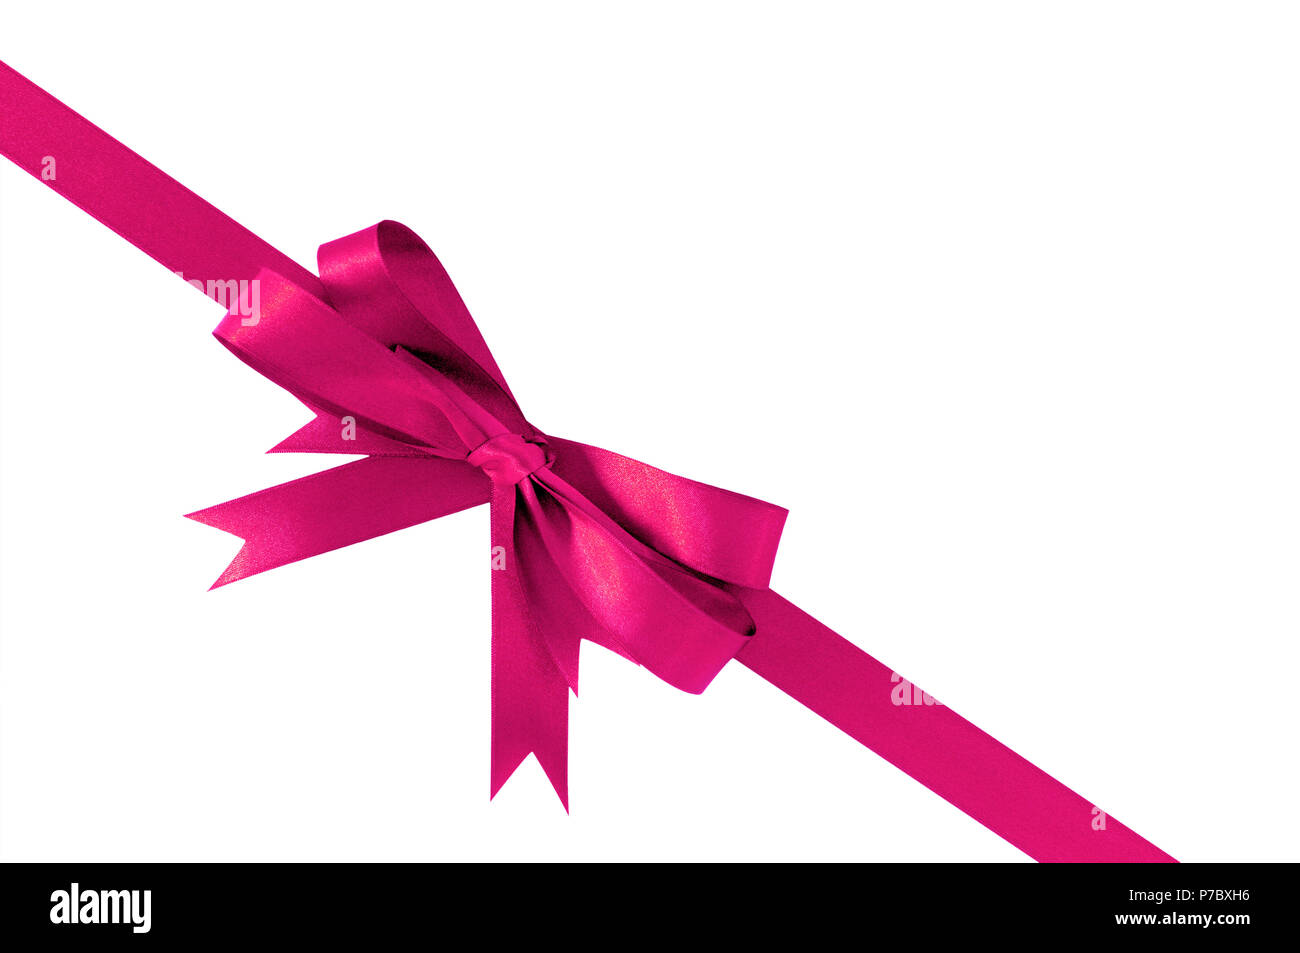 Pink gift ribbon bow. Pink red satin ribbon with knotted bow gift